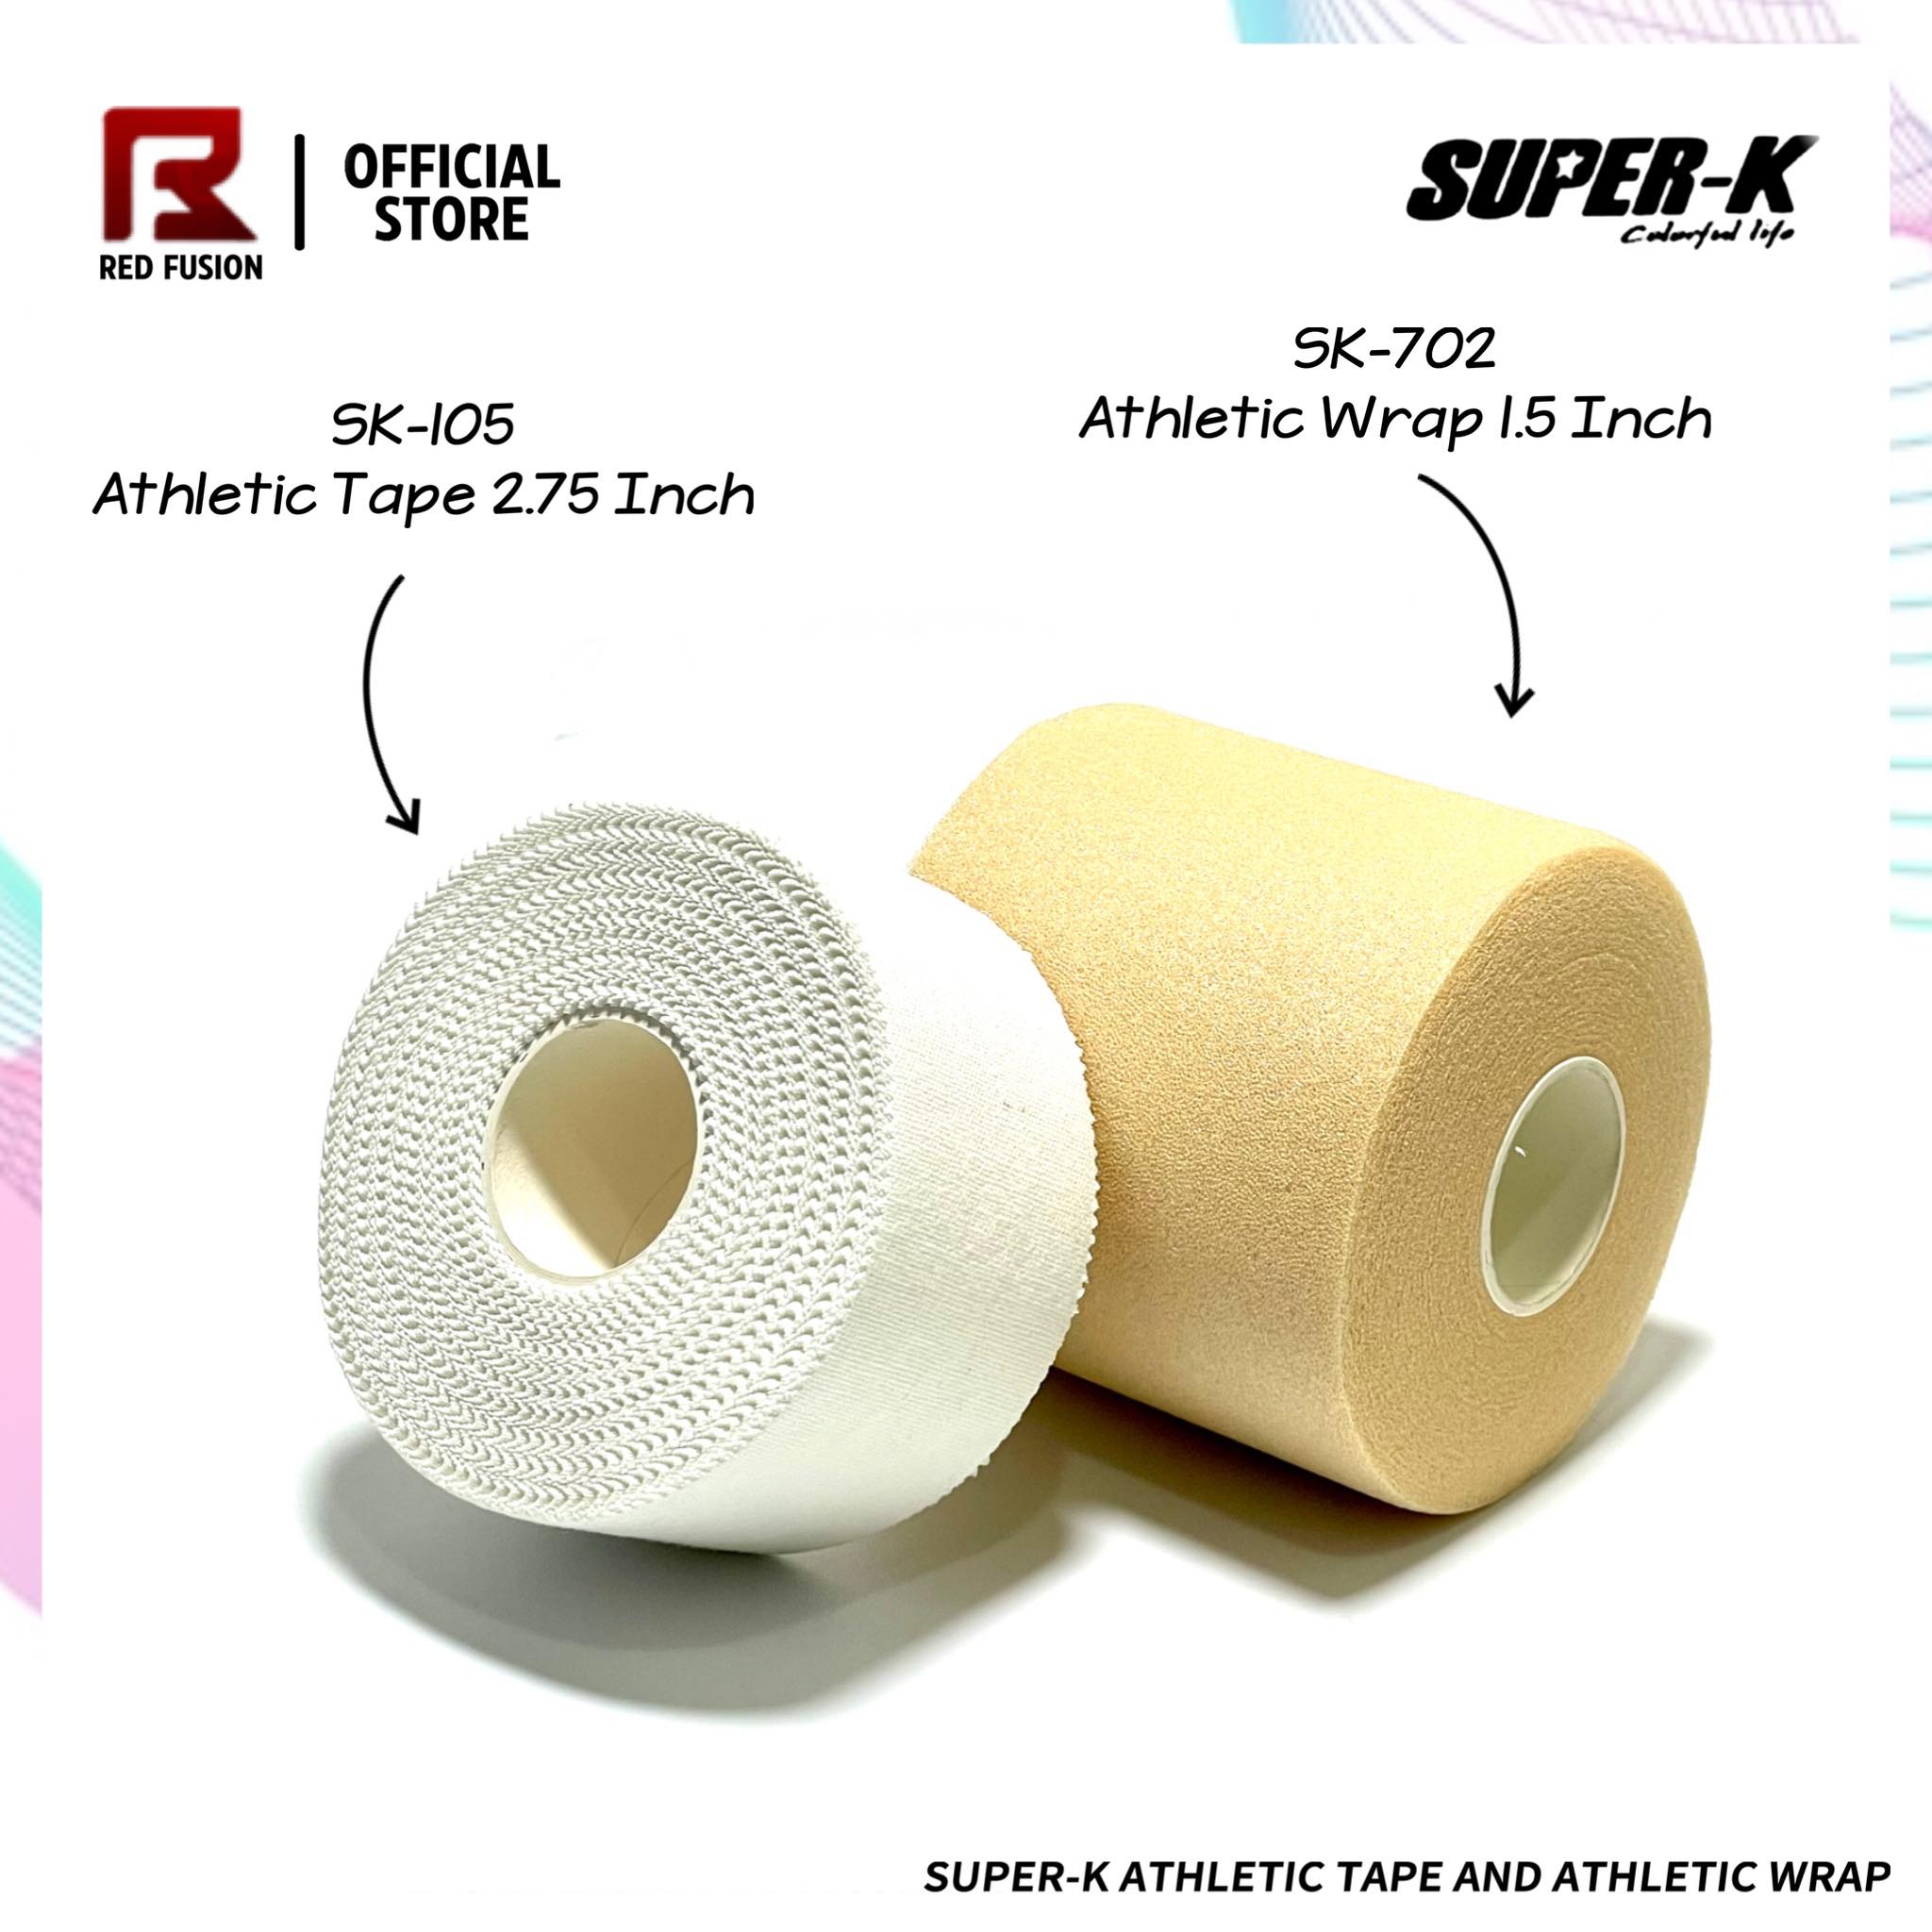 Super-K Athletic Tape and Wrap Joint Support and Muscle Protection